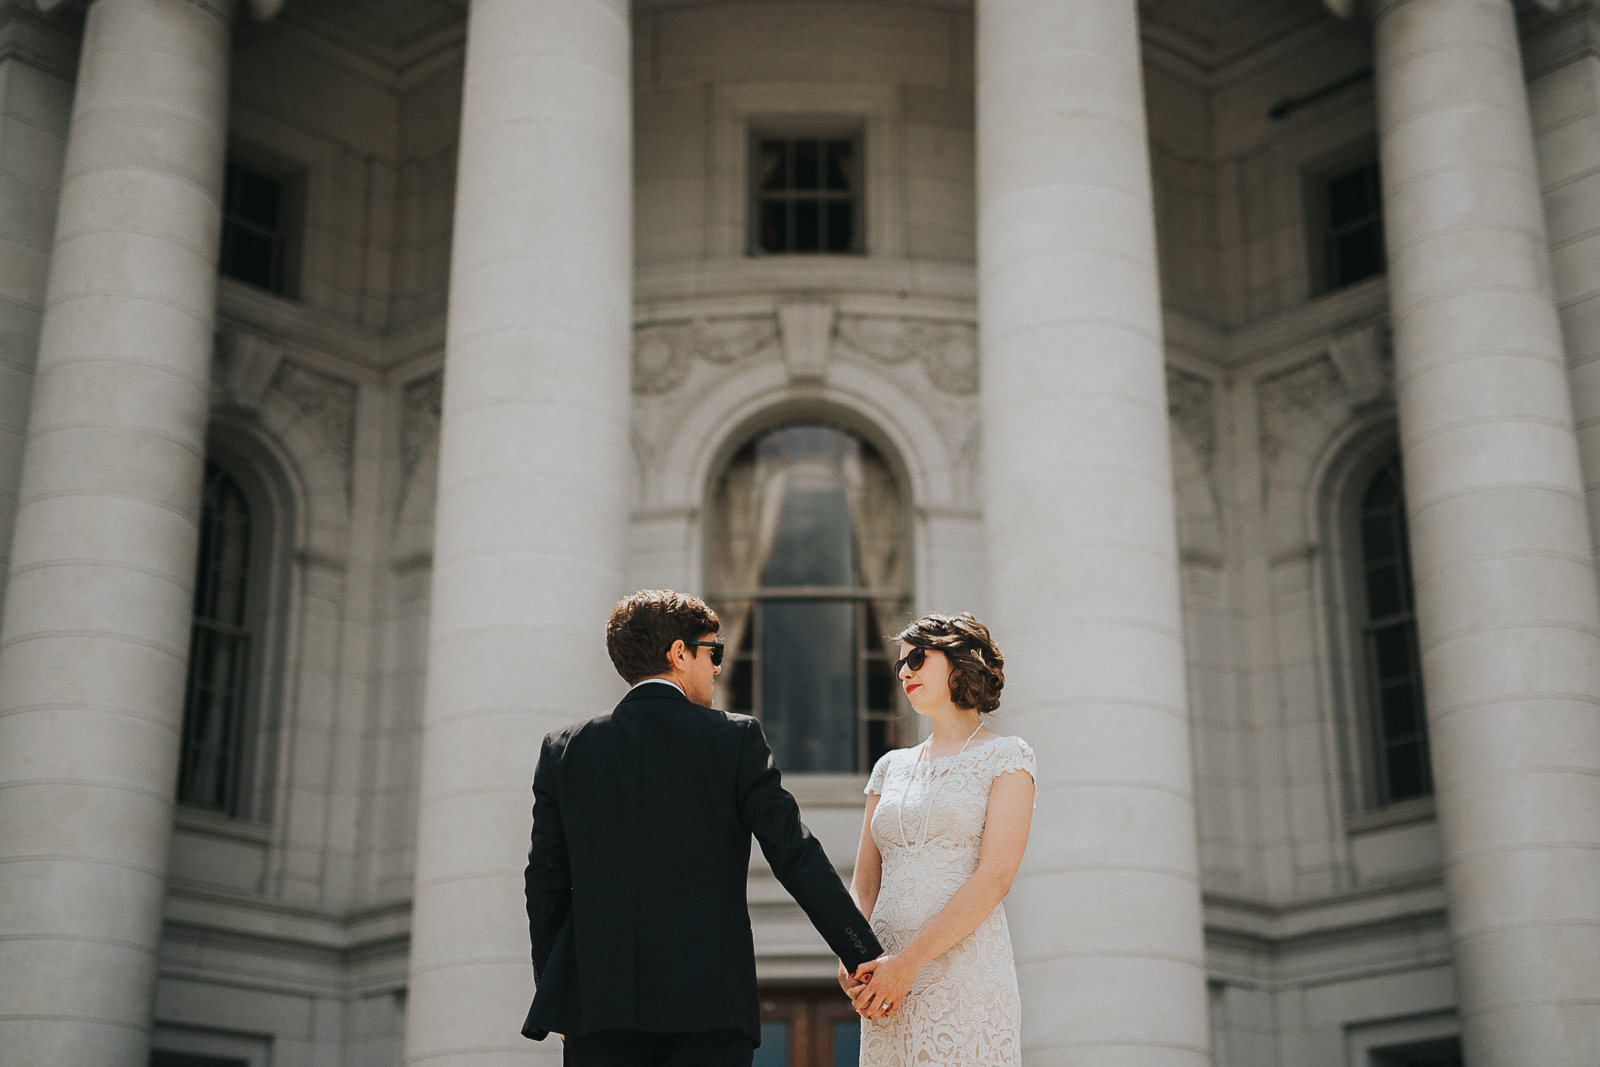 30 bride and groom in madison capital building - Megan + Jon // Orpheum Wedding Photography in Madison